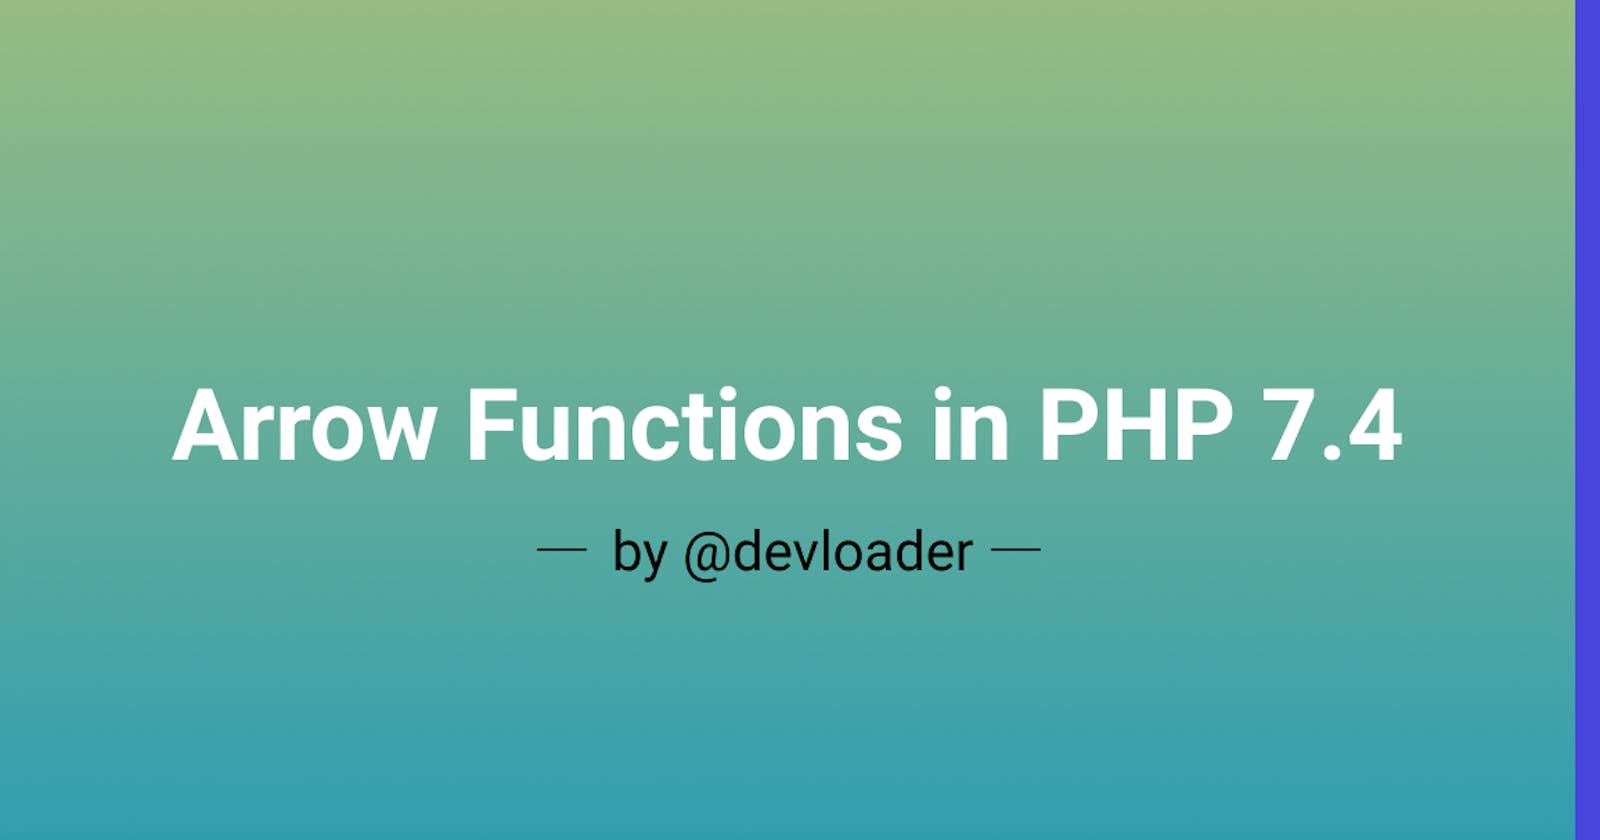 Using arrow functions in PHP 7.4